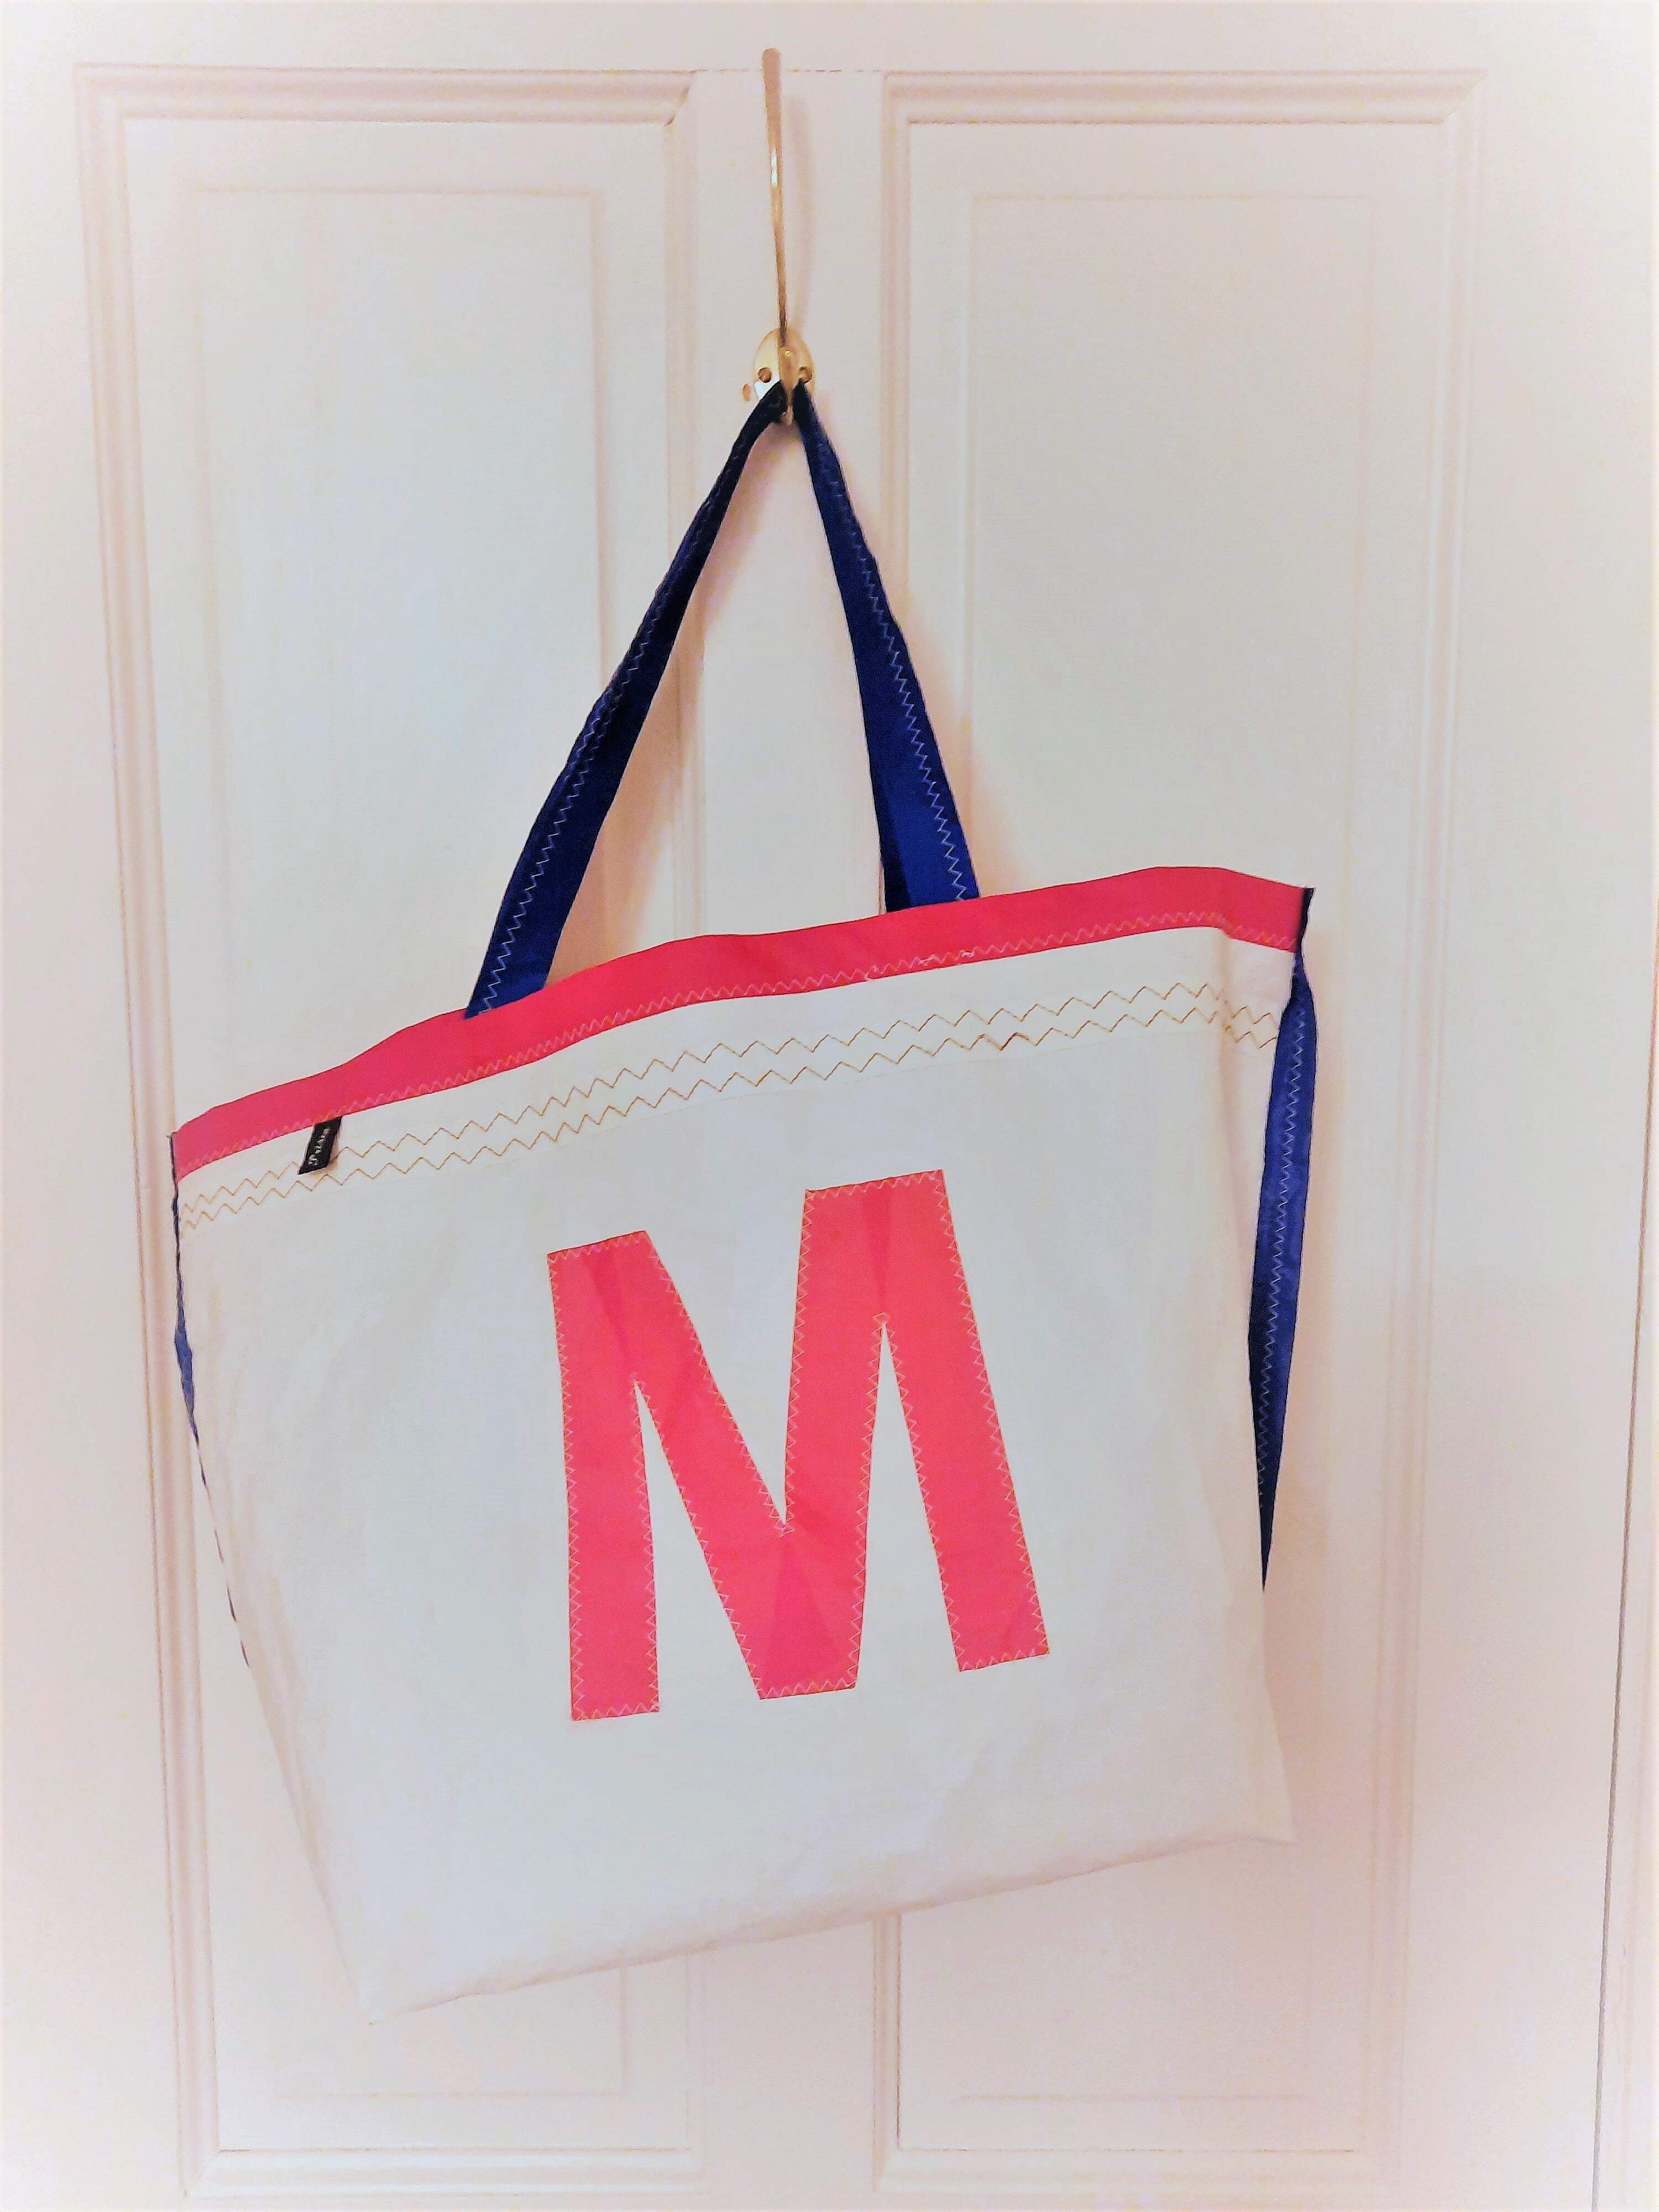 Example of a standard tote bag with an initial